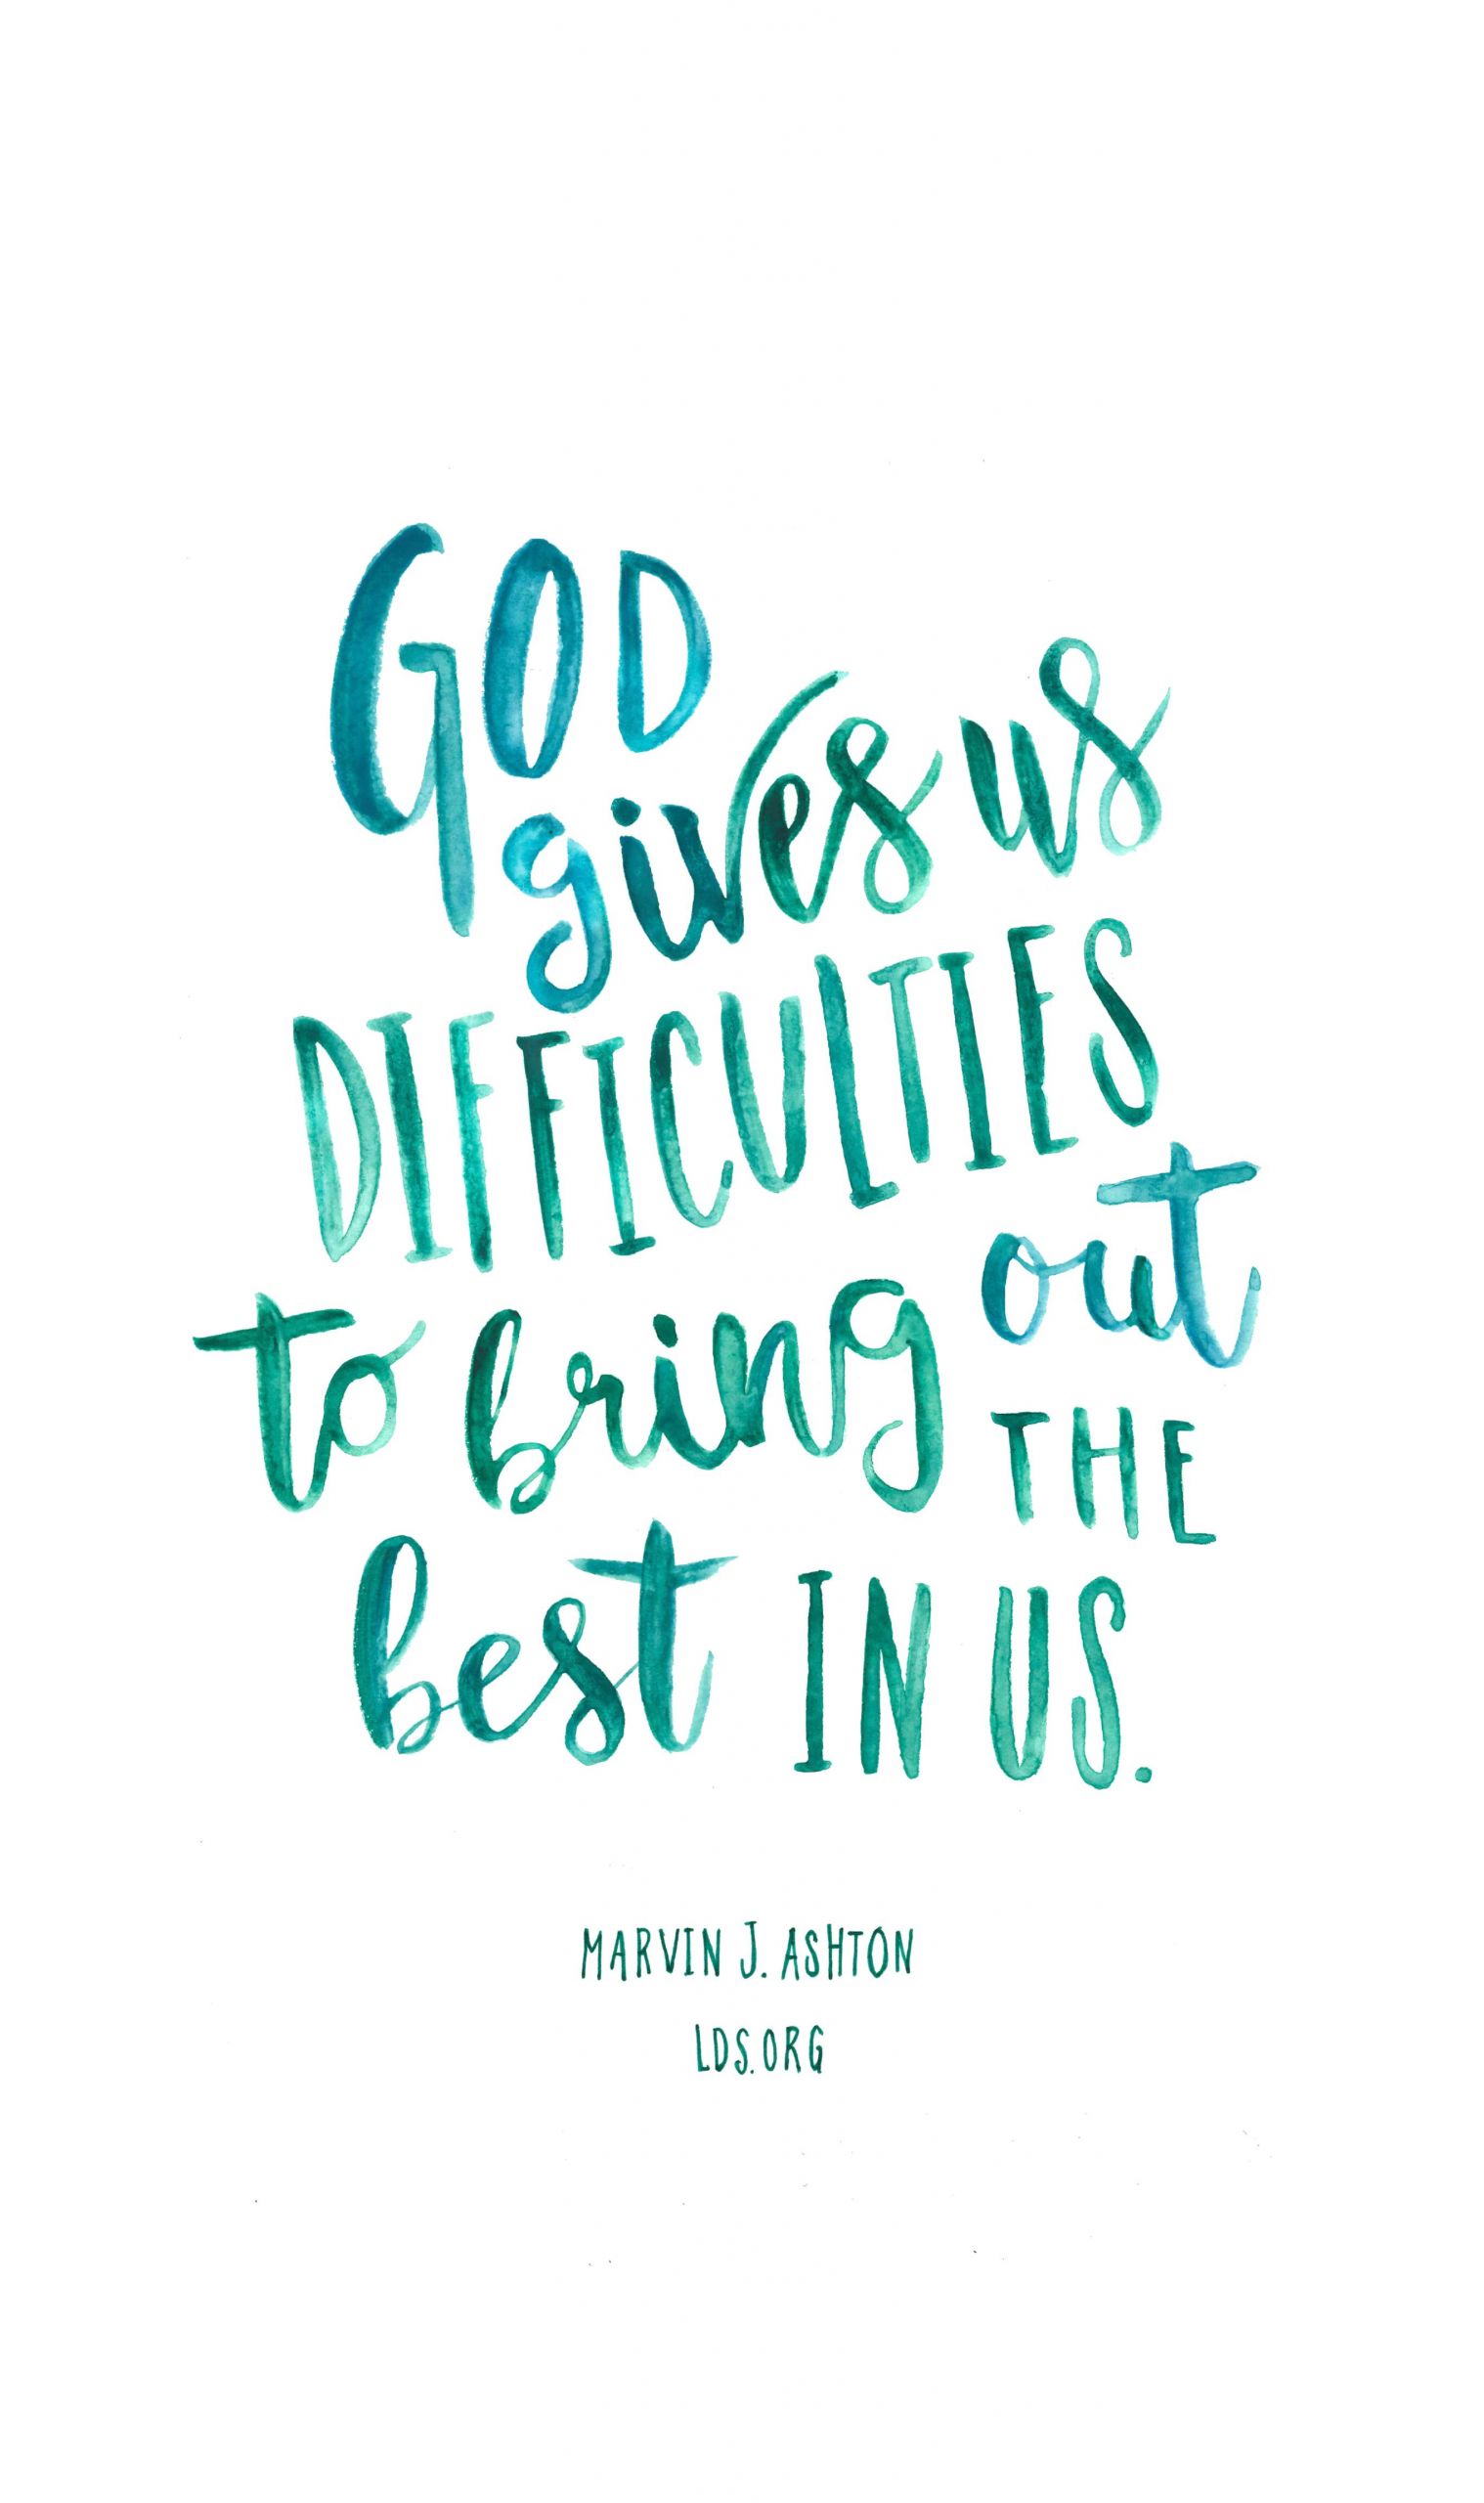 Lds Positive Quotes
 God gives us difficulties to bring out the best in us